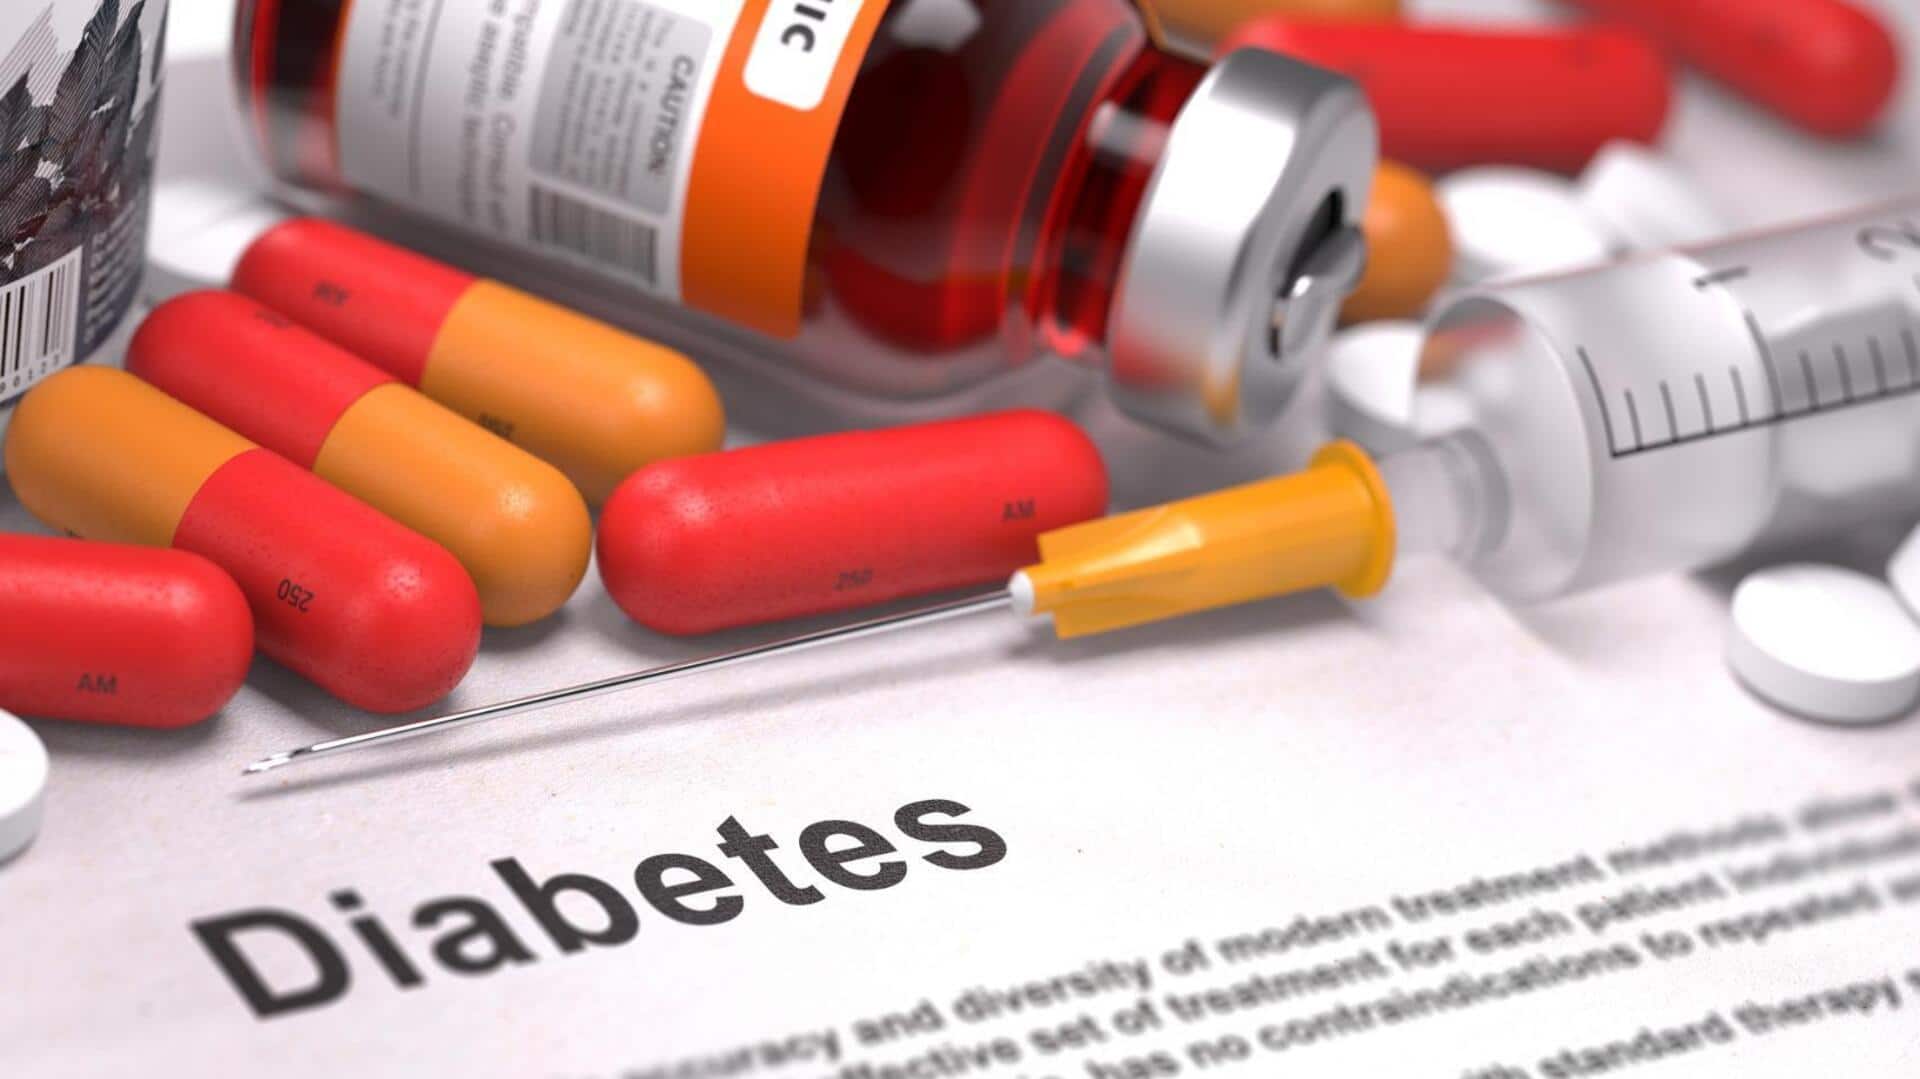 Diabetes, BP medicines to become cheaper in India: Here's why